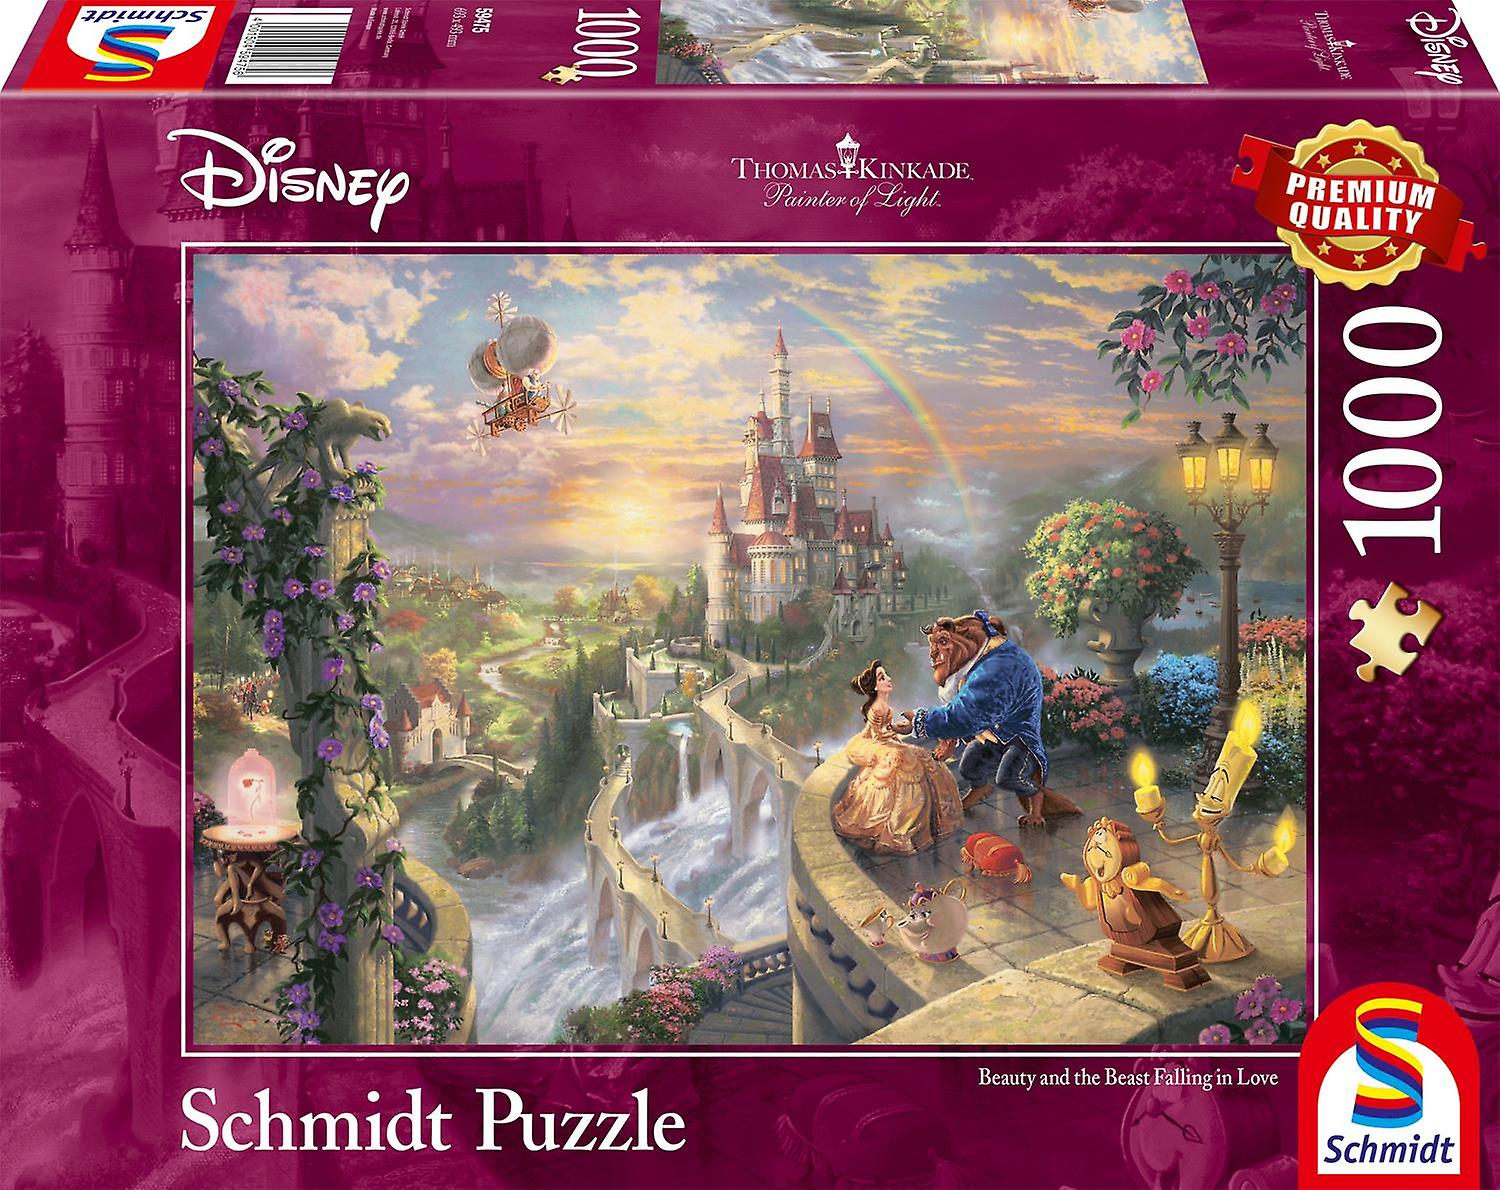 Schmidt Kinkade Disney Beauty and The Beast Falling in Love Jigsaw Puzzle (1000 Pieces)